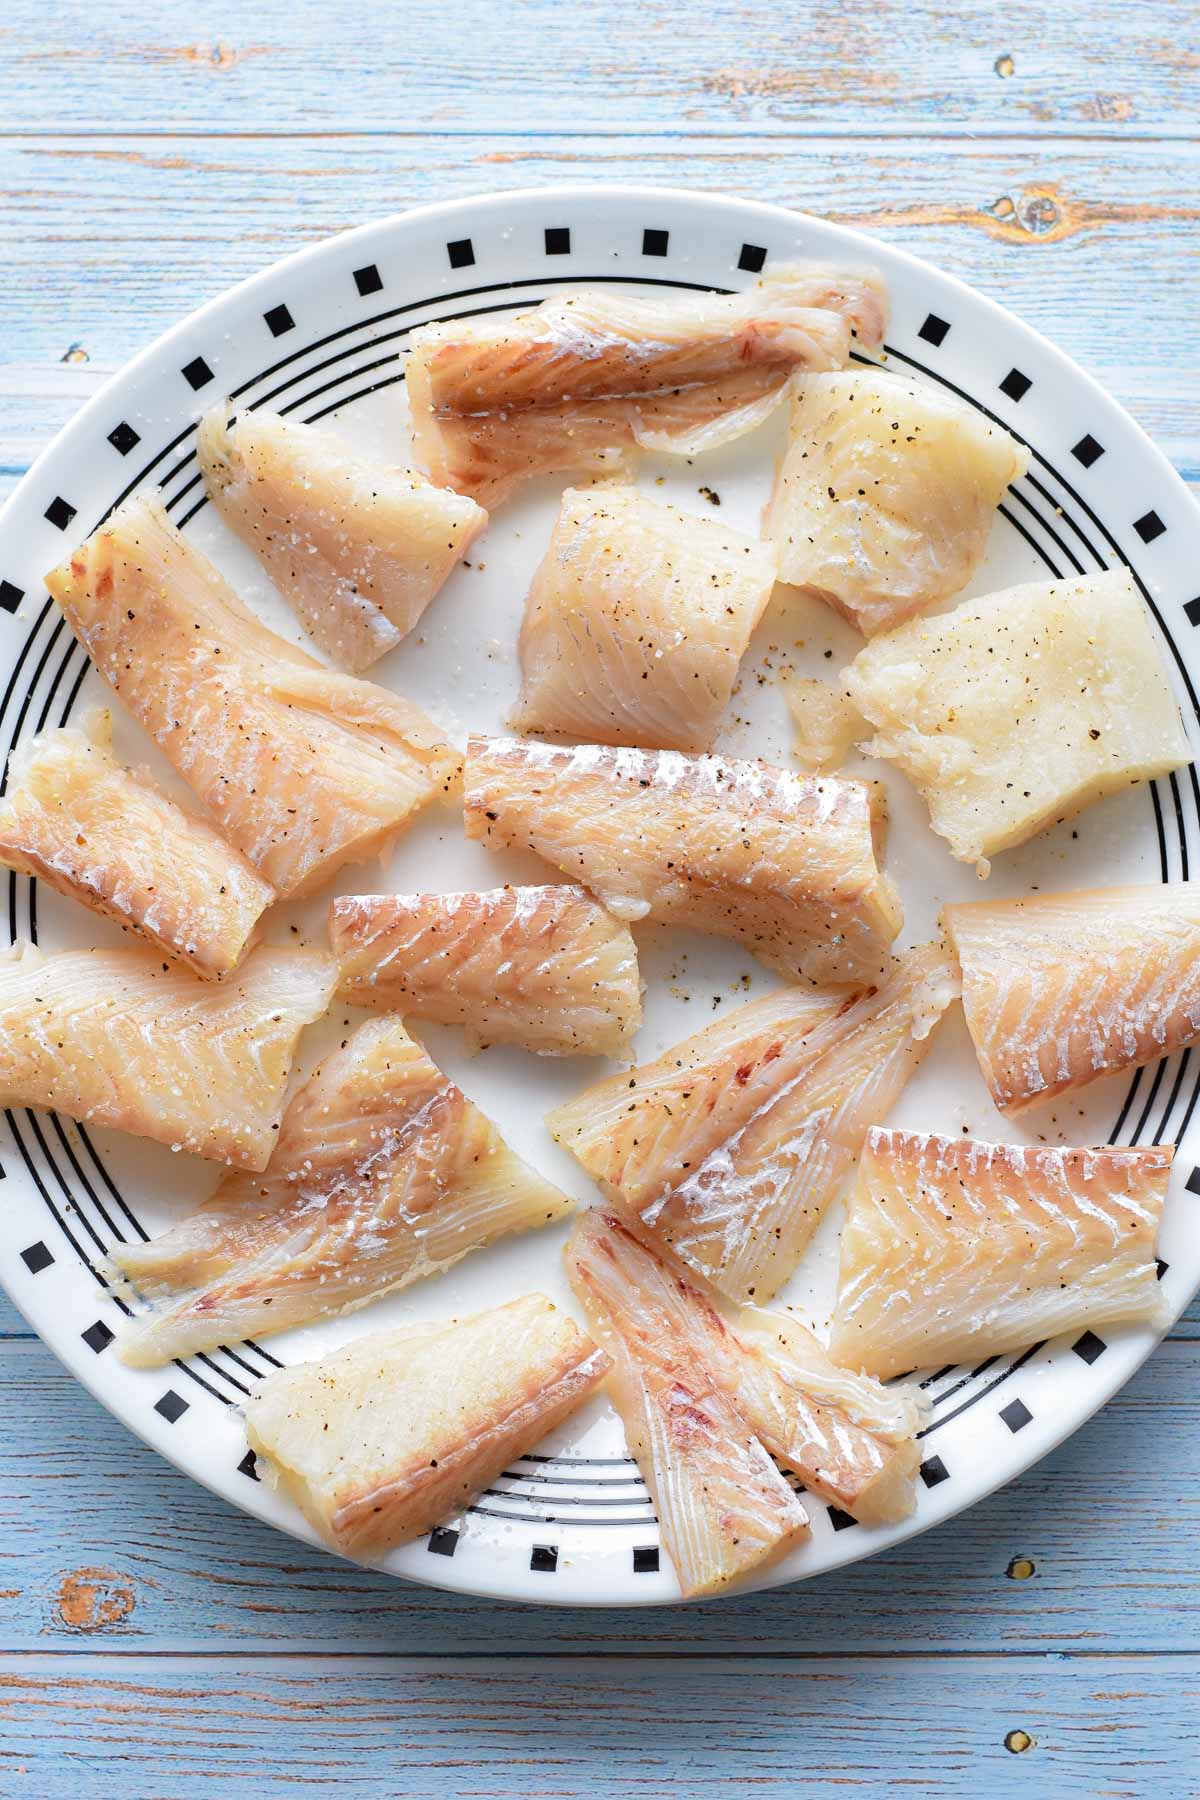 chopped white fish fillets seasoned with sea salt and ground black pepper on a black and white plate.